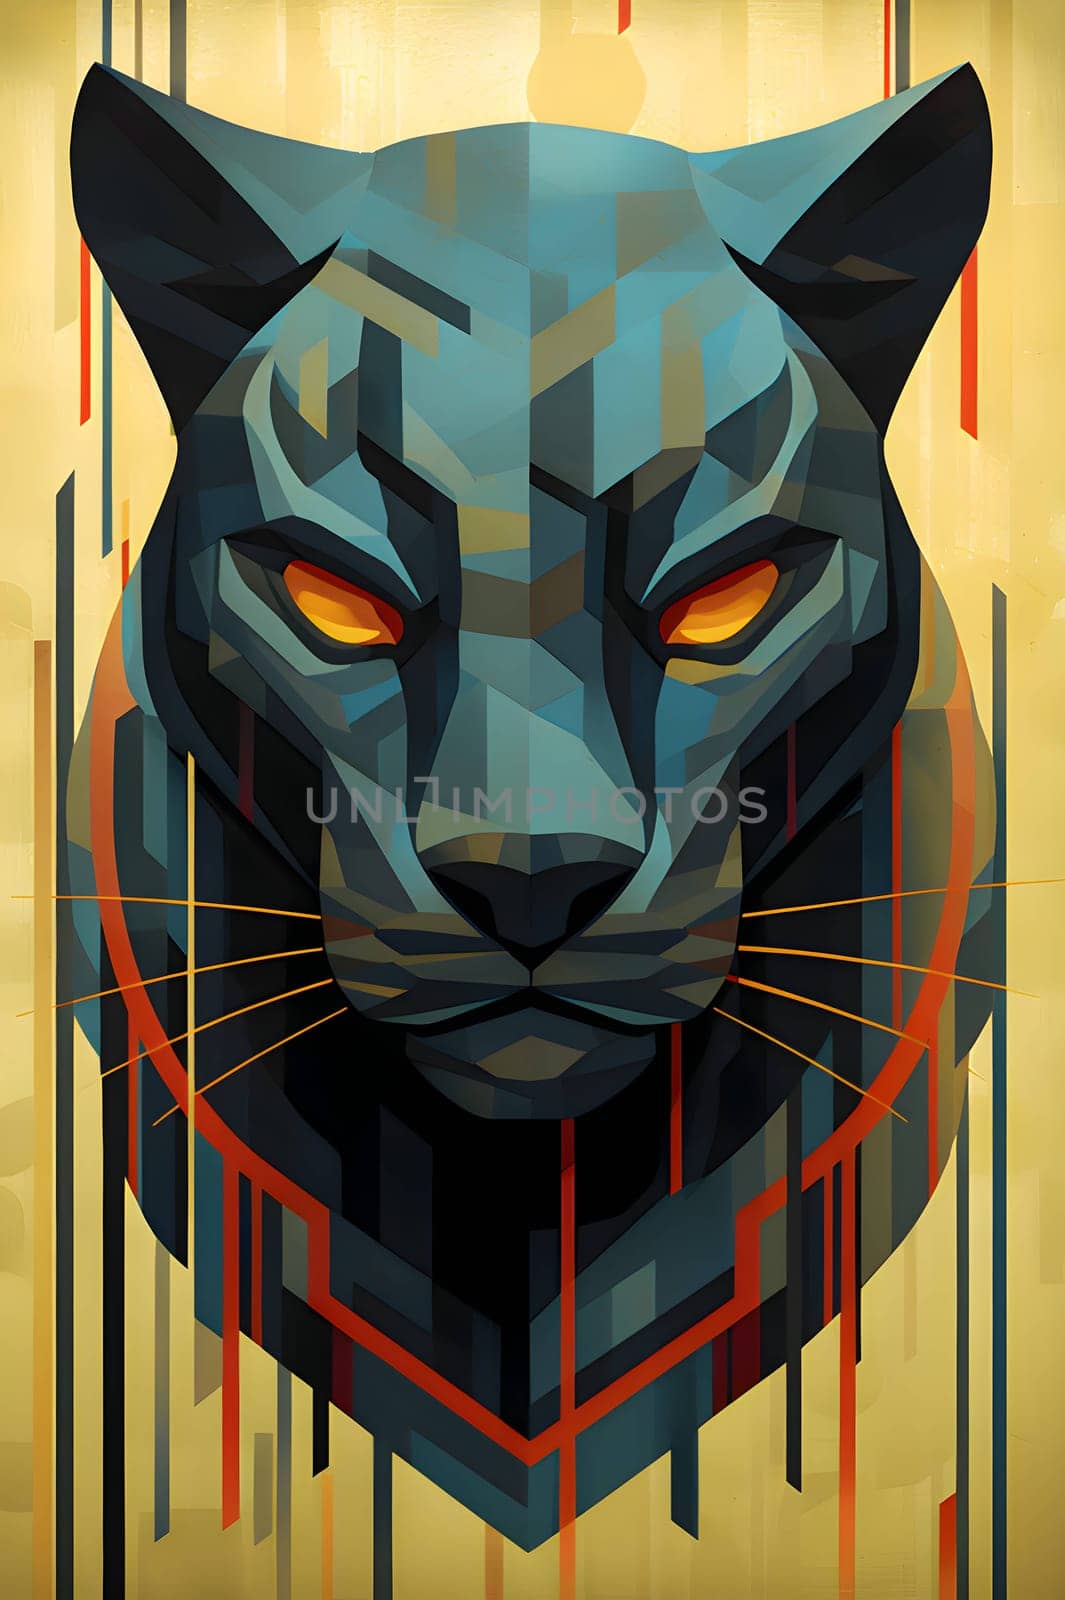 Abstract illustration: Vector illustration of a black panther head with abstract geometric background.